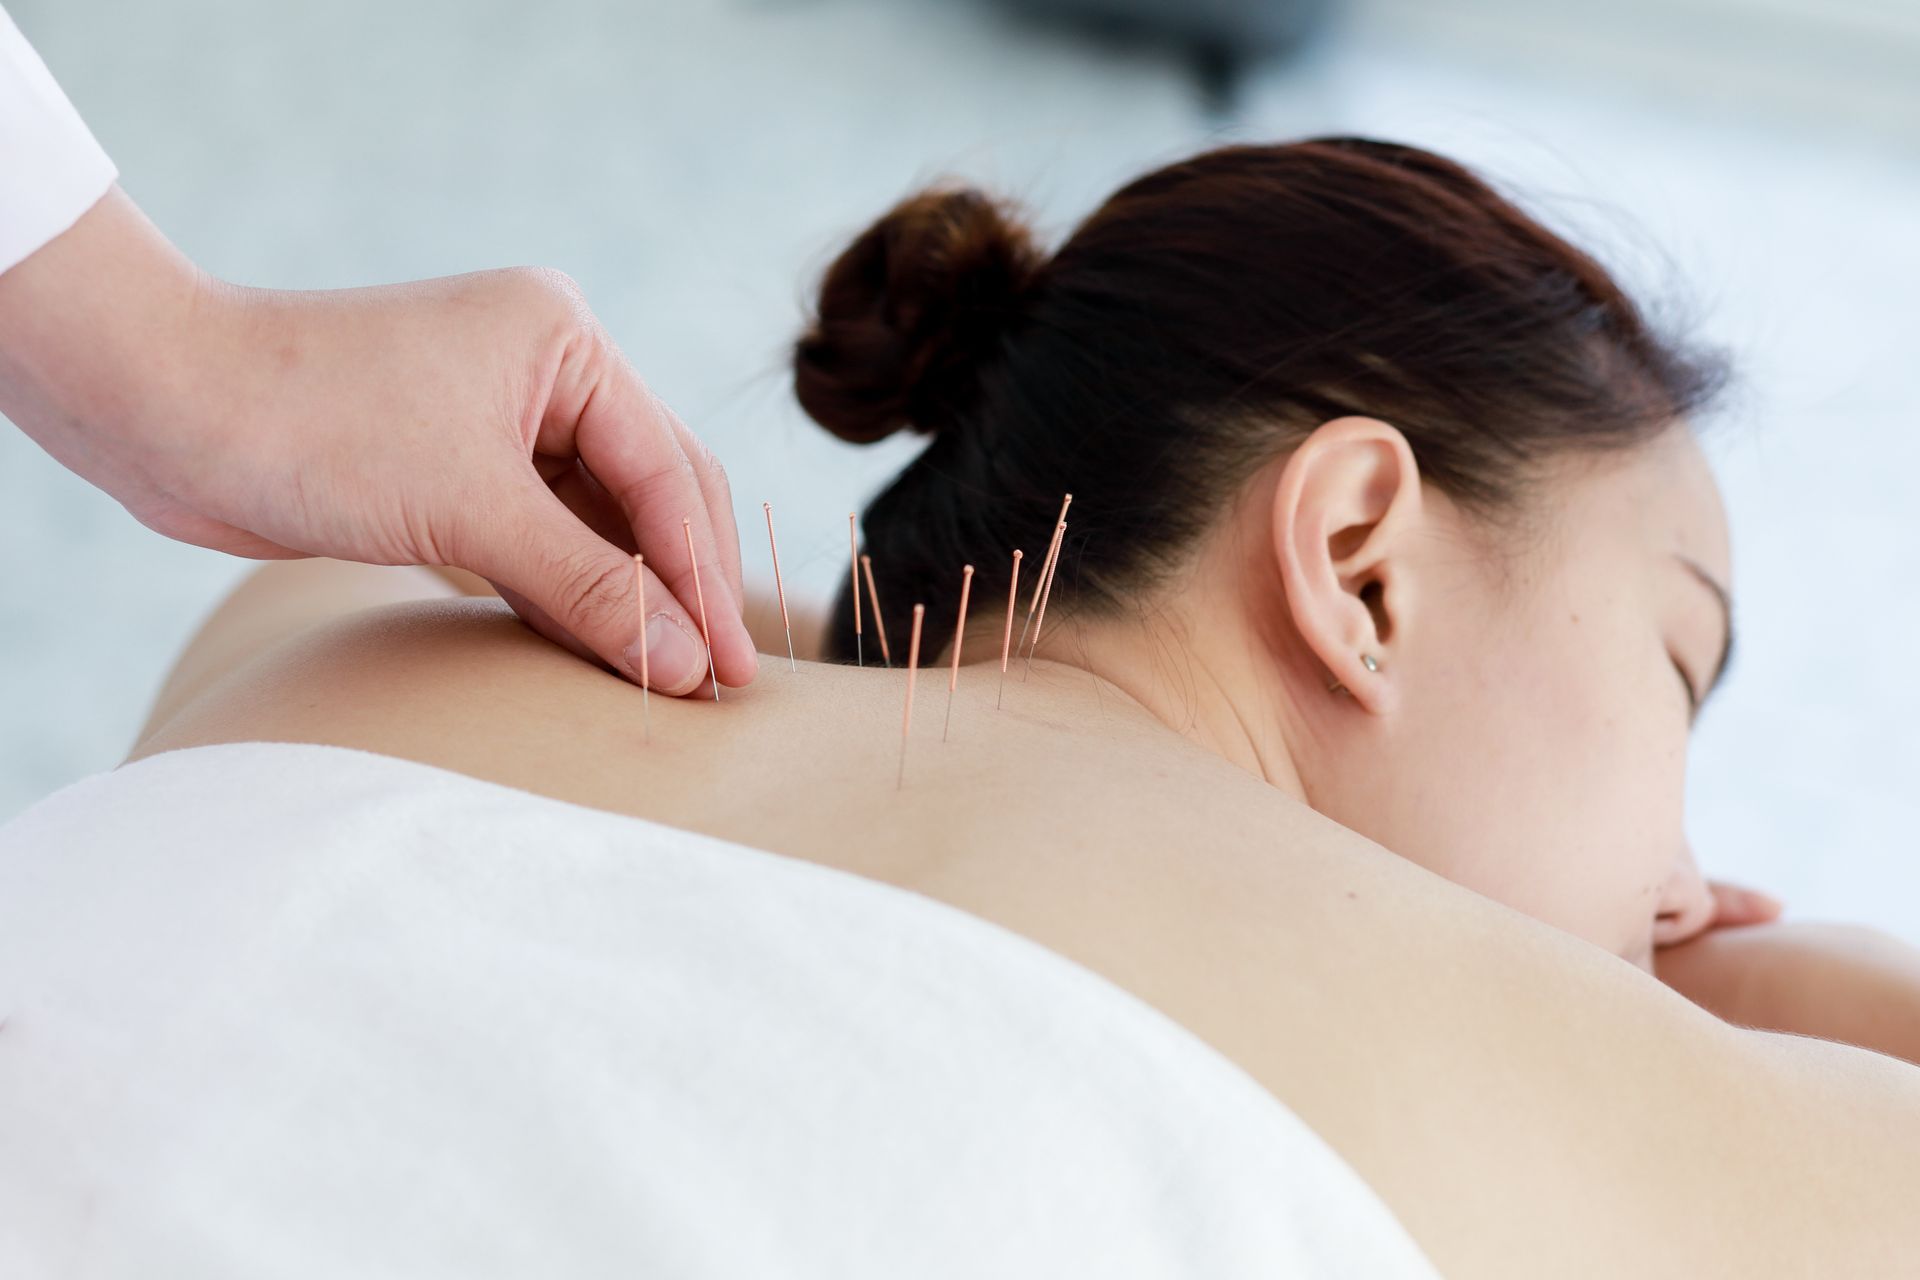 a woman is getting acupuncture on her back .